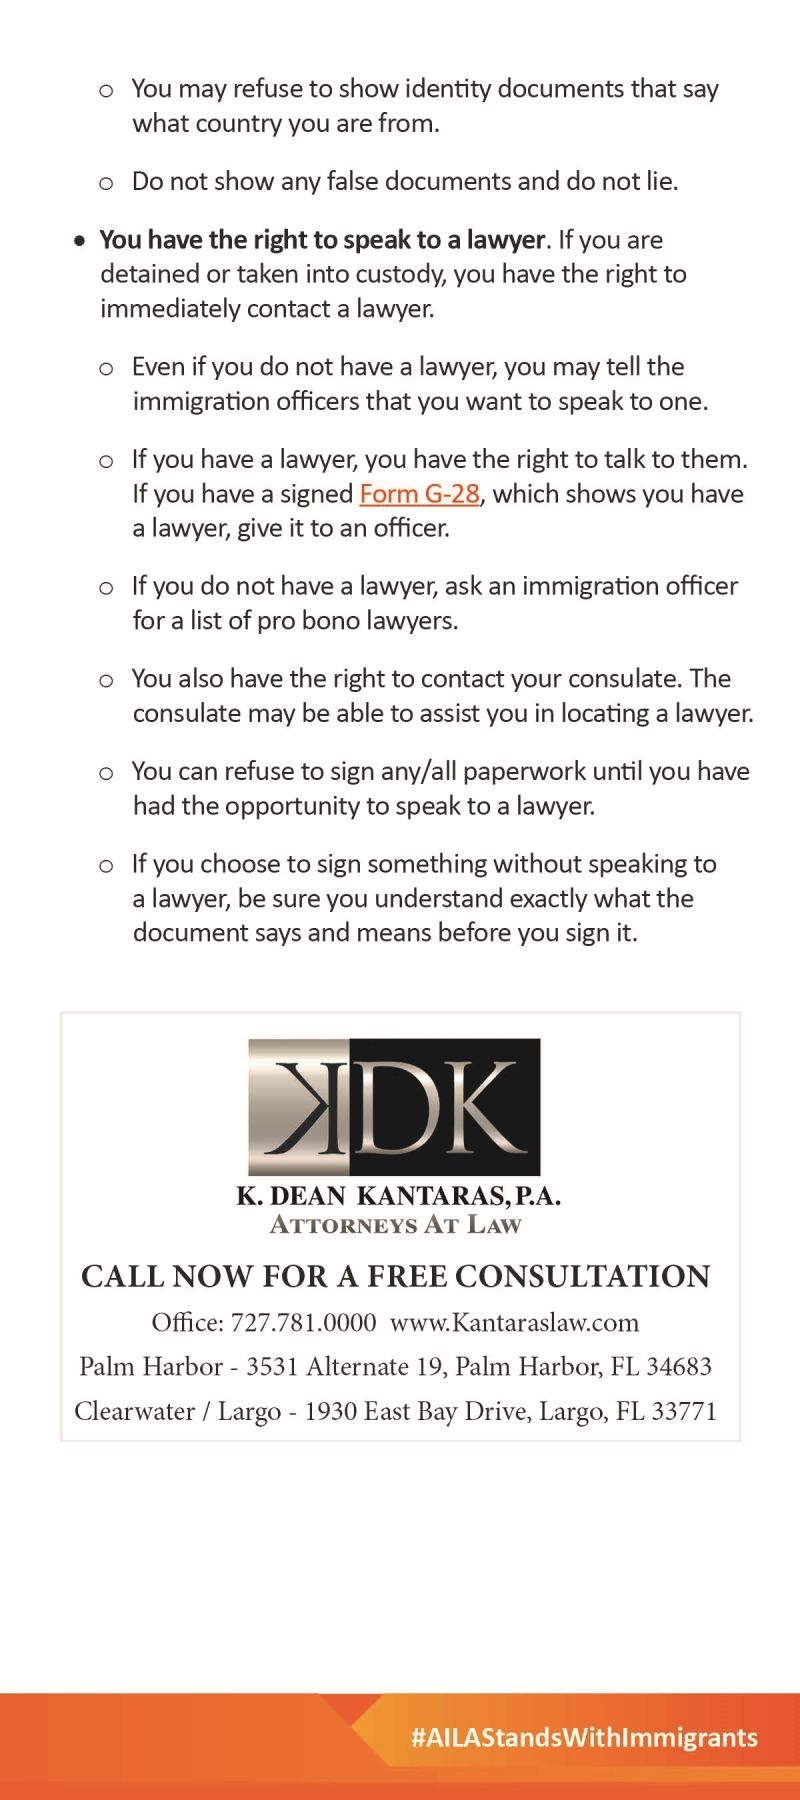 Know Your Rights: What to do if ICE visits your home